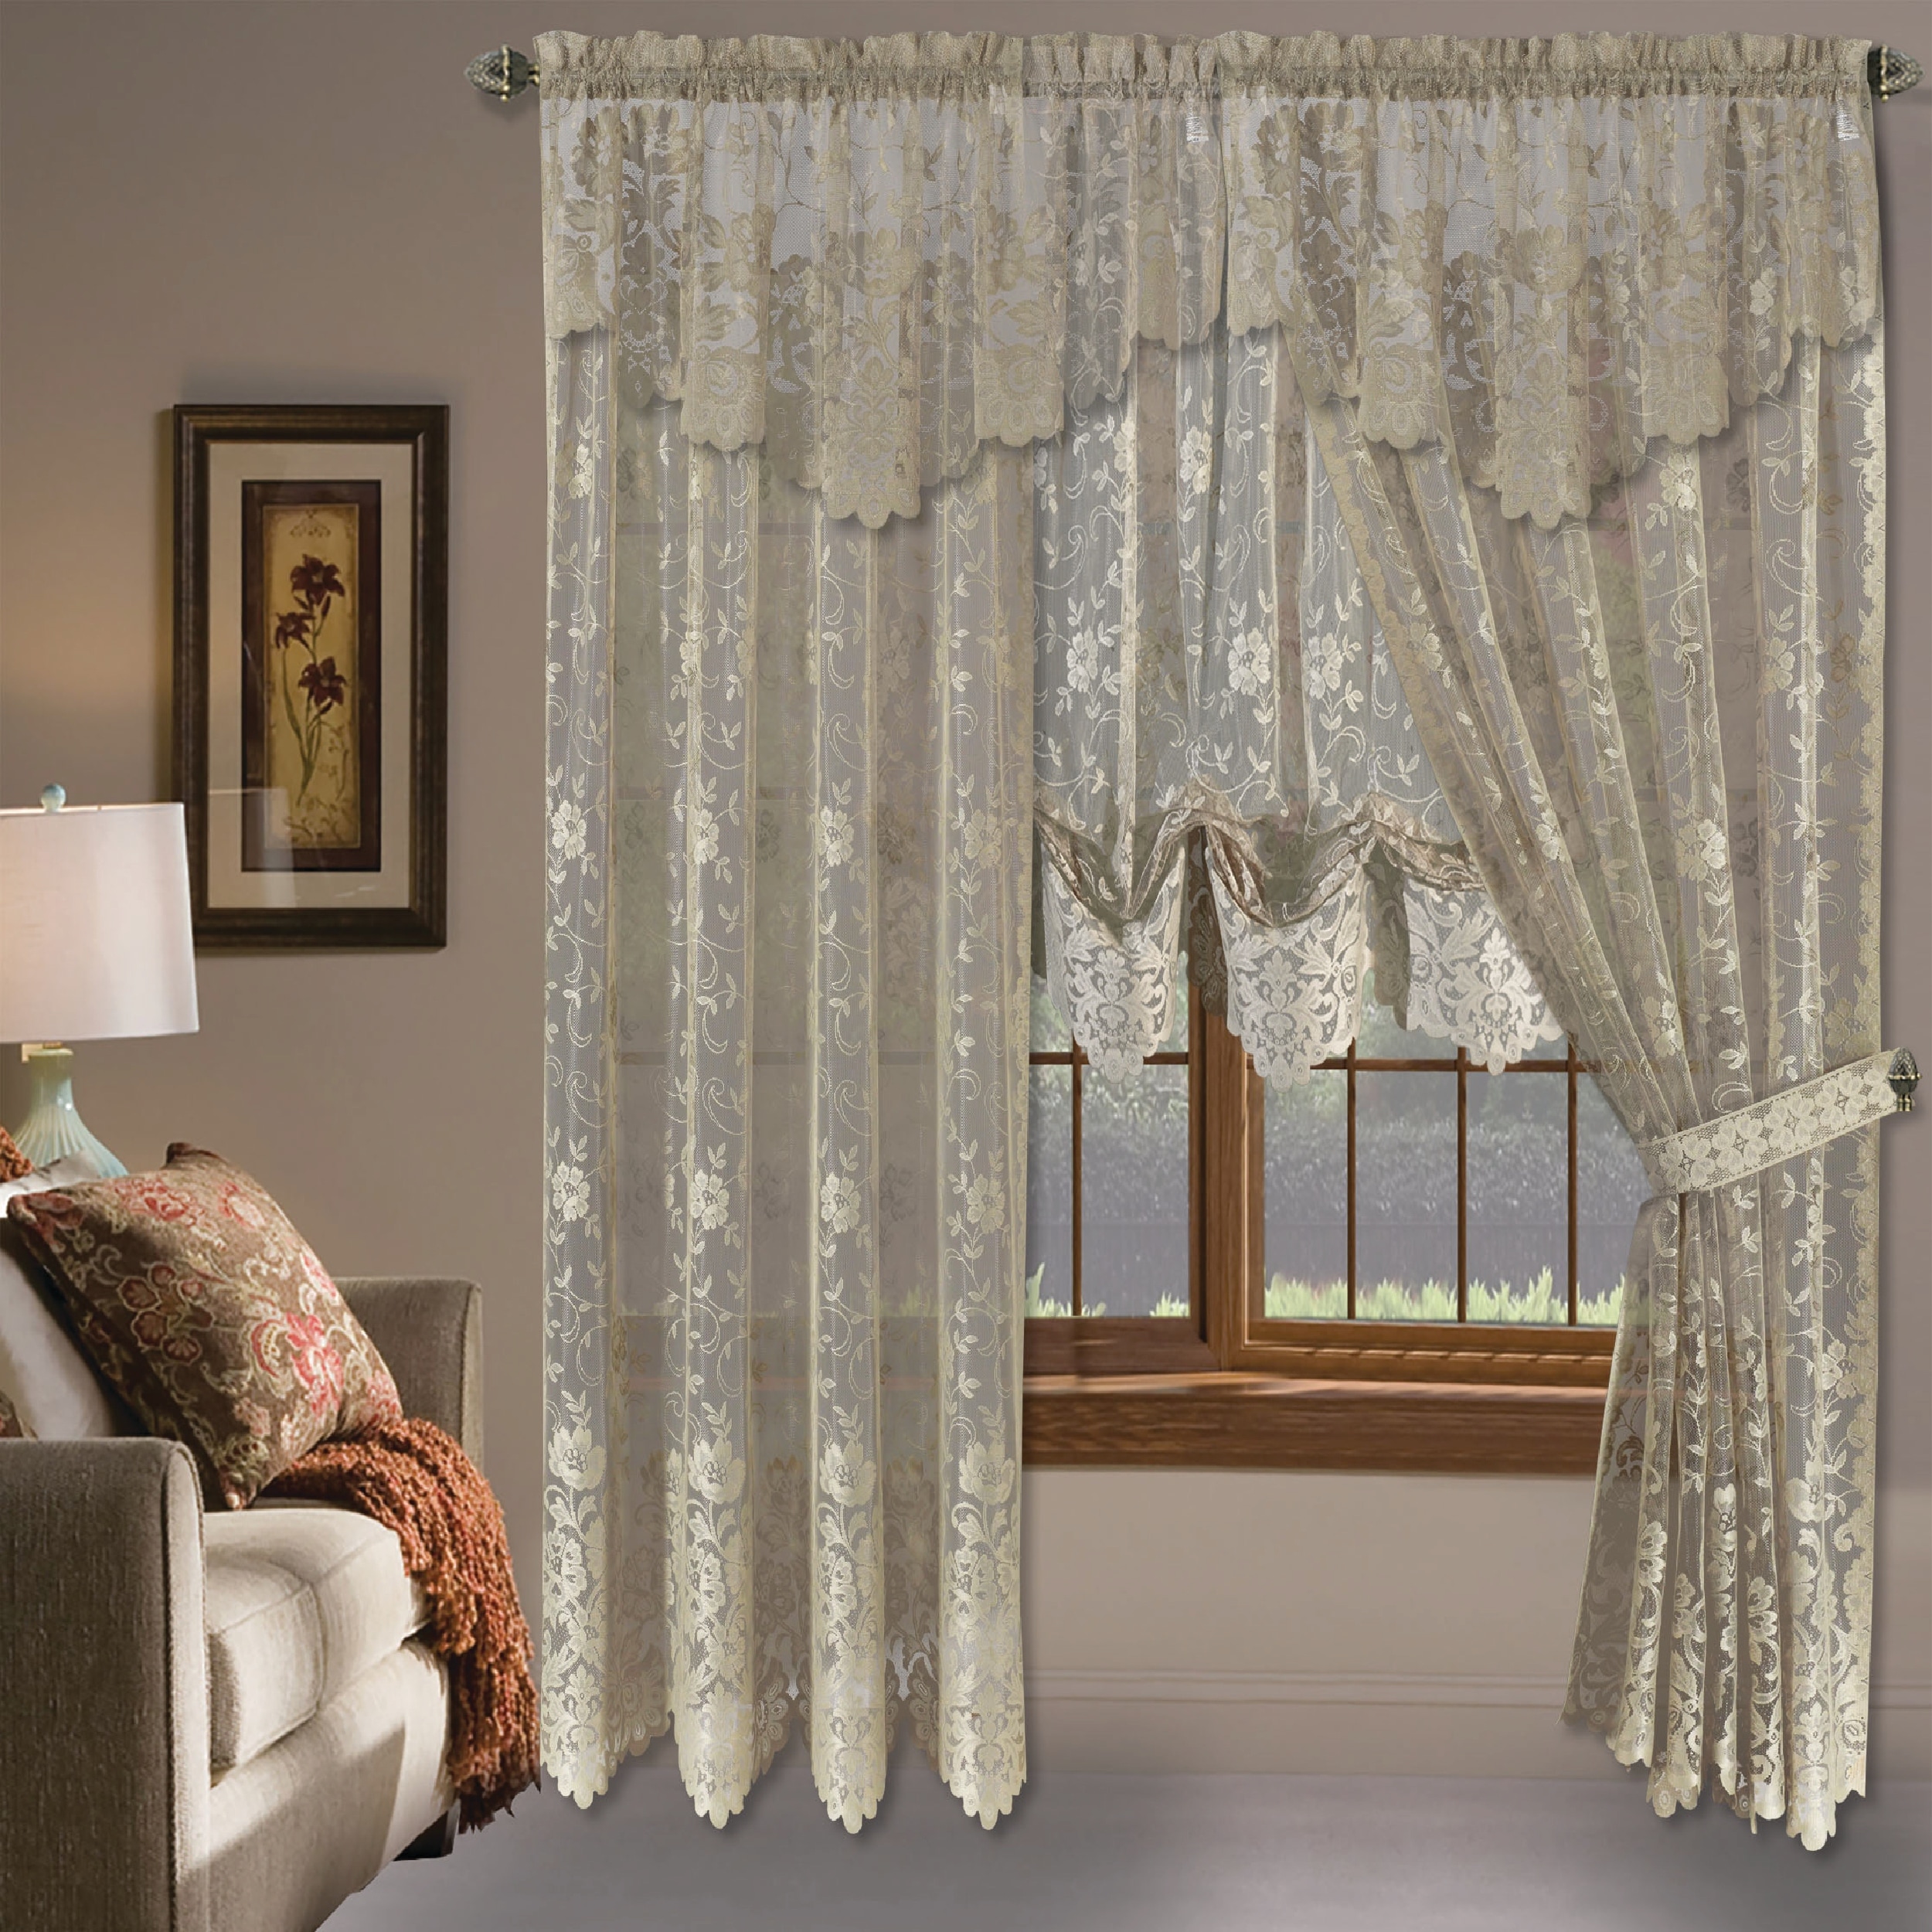 Window Curtains Embroidered Sheer Voile Drapes Living Room Door Gold Lace Blinds 